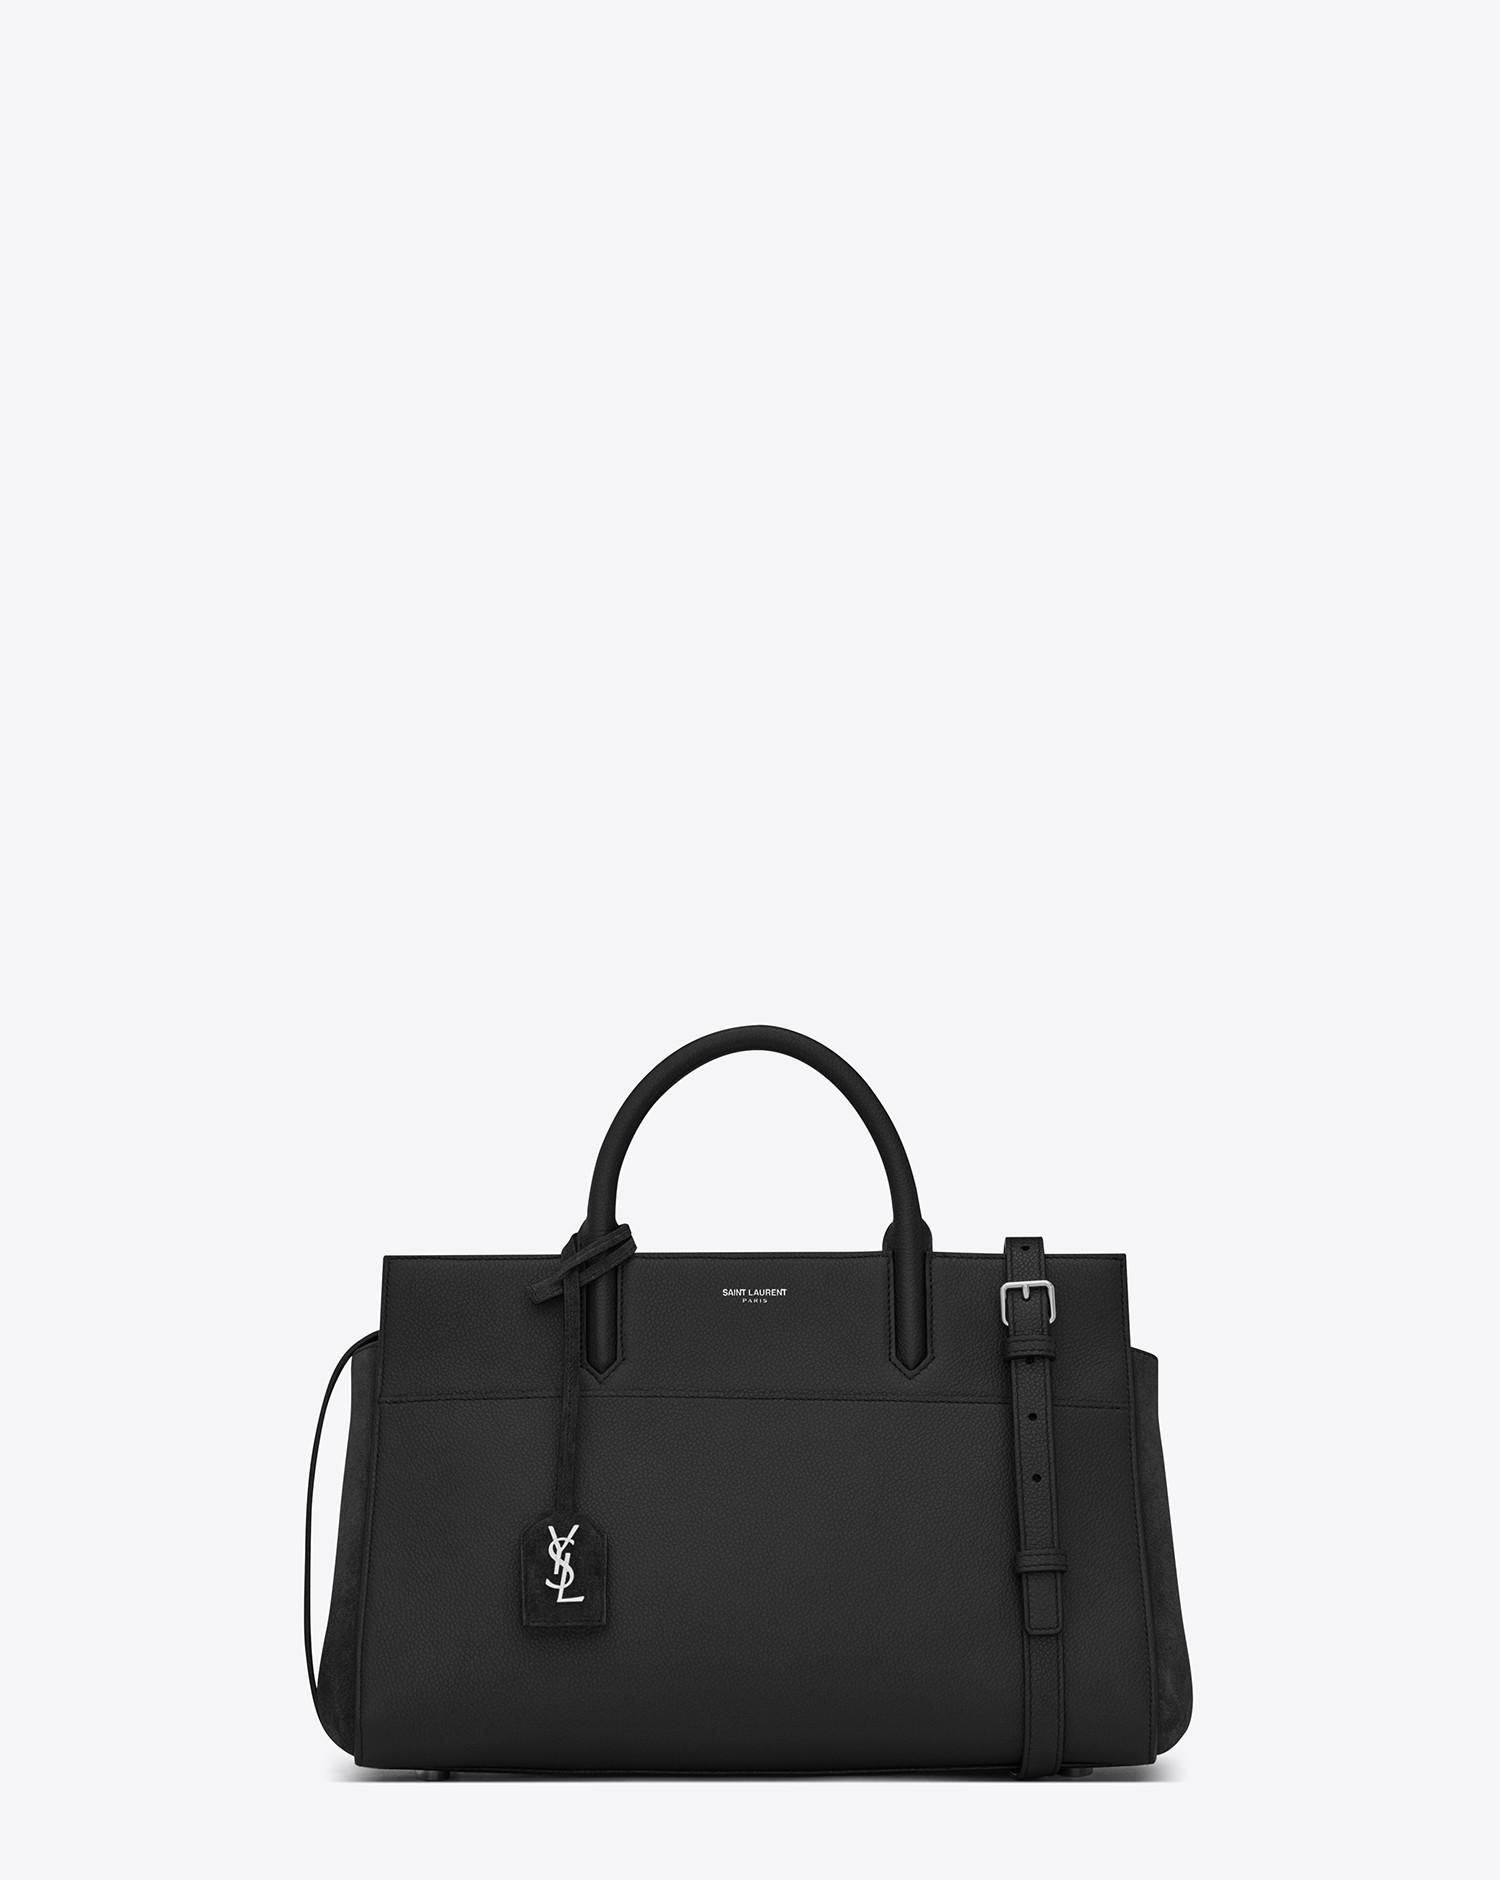 Saint Laurent Small Cabas Rive Gauche Bag In Black Grained Leather